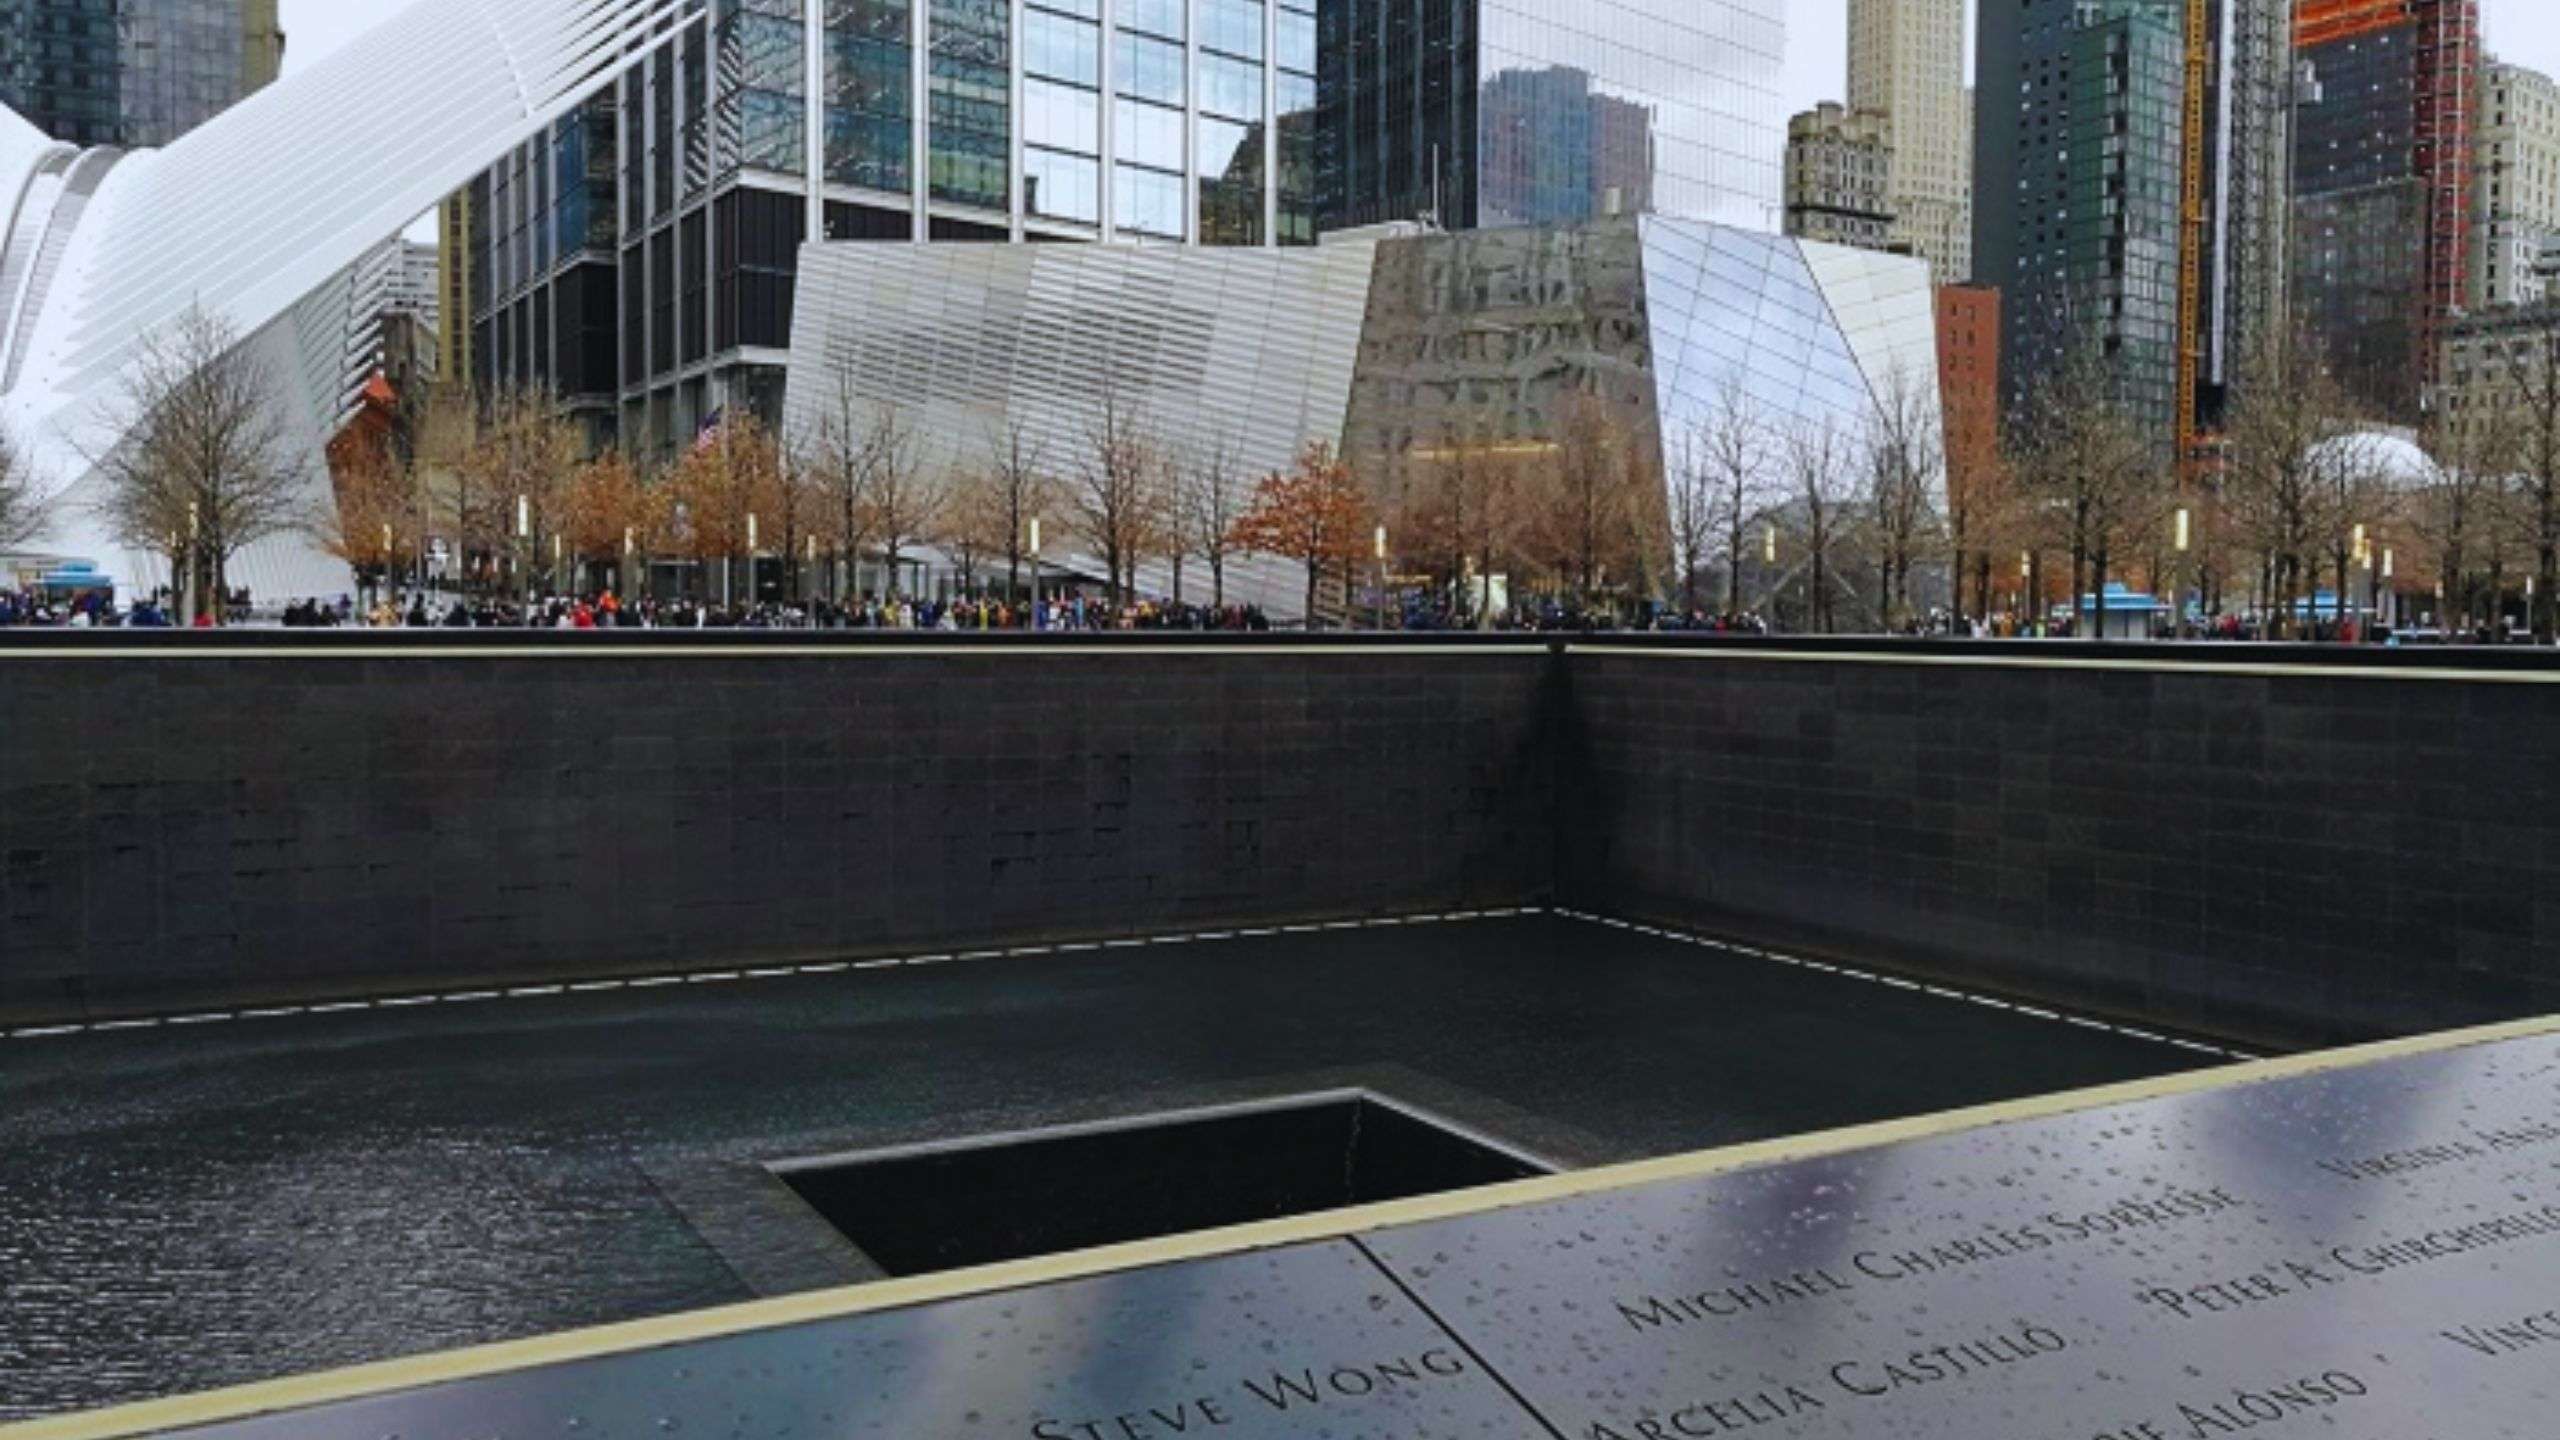 National 9/11 Memorial & Museum: A Place of Remembrance